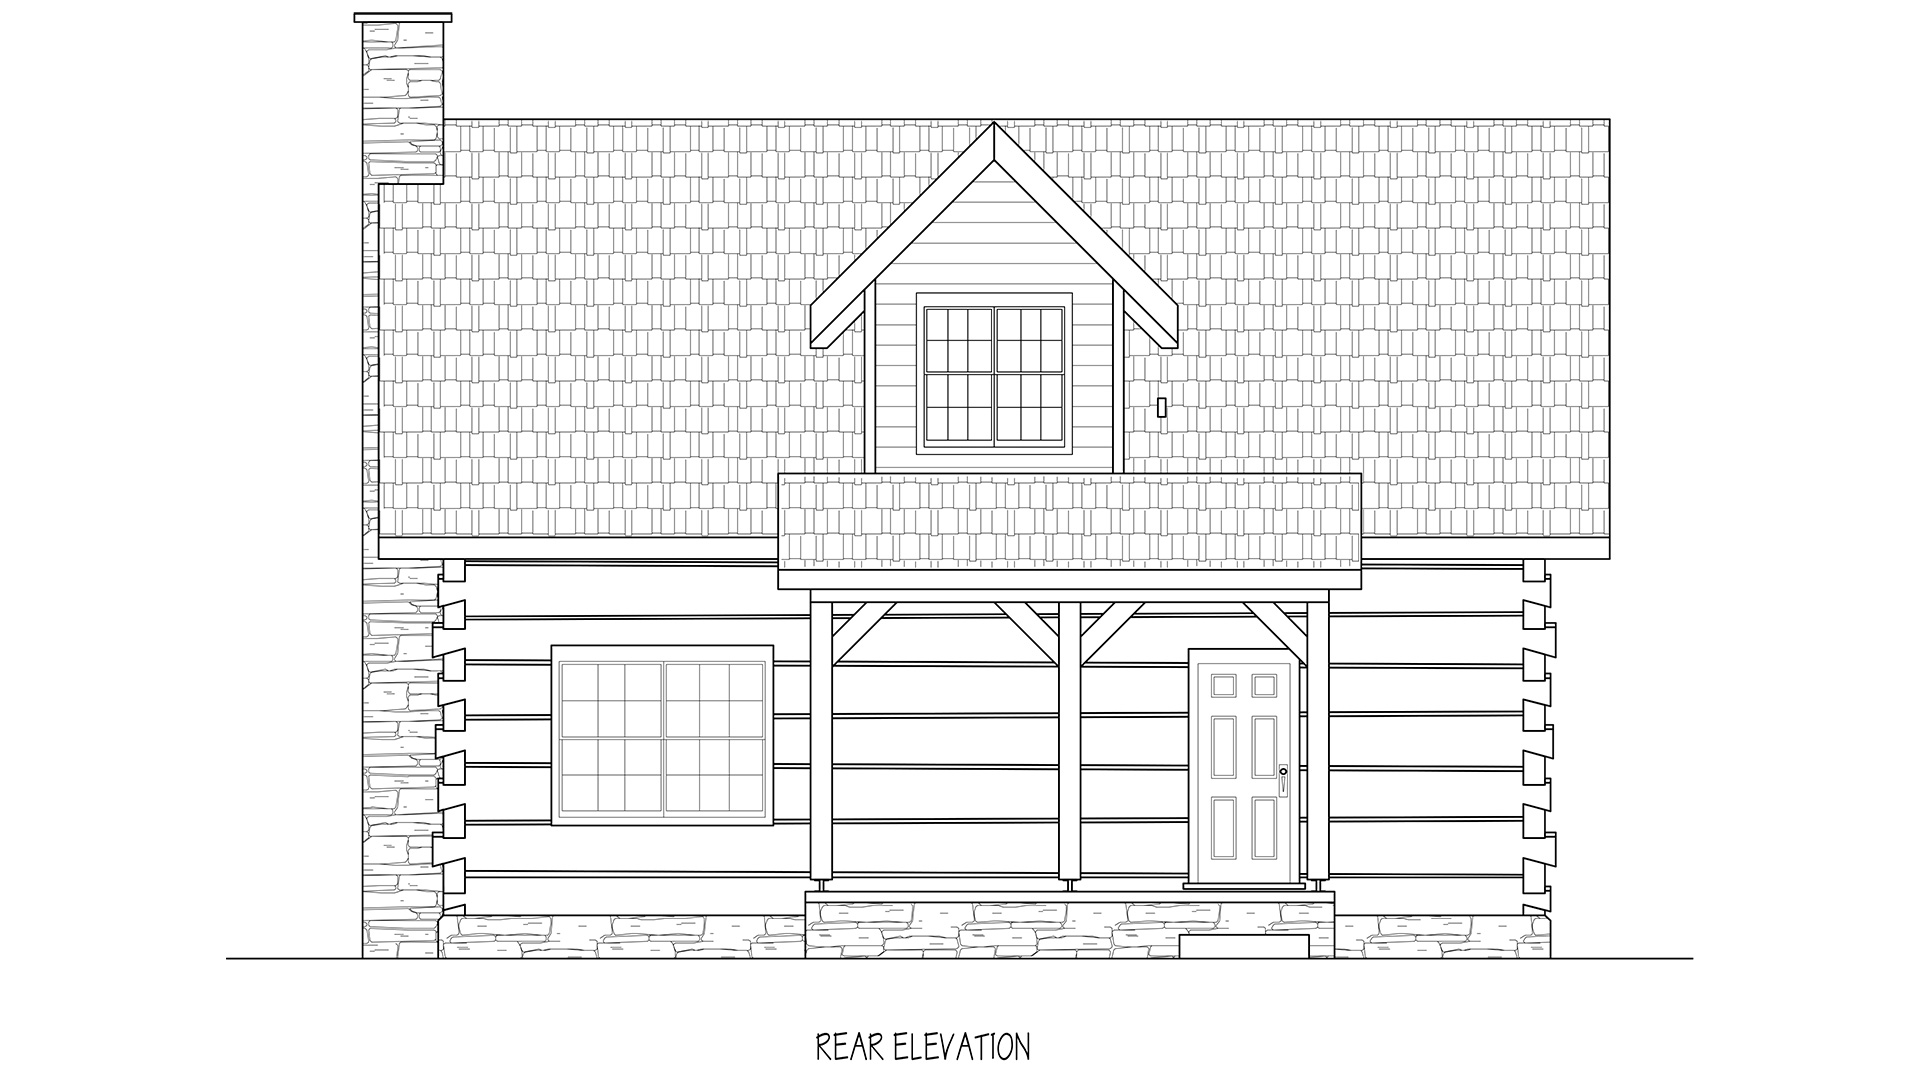 Featured Plan Spring 2018 Powers Rear Elevation Hearthstone Homes